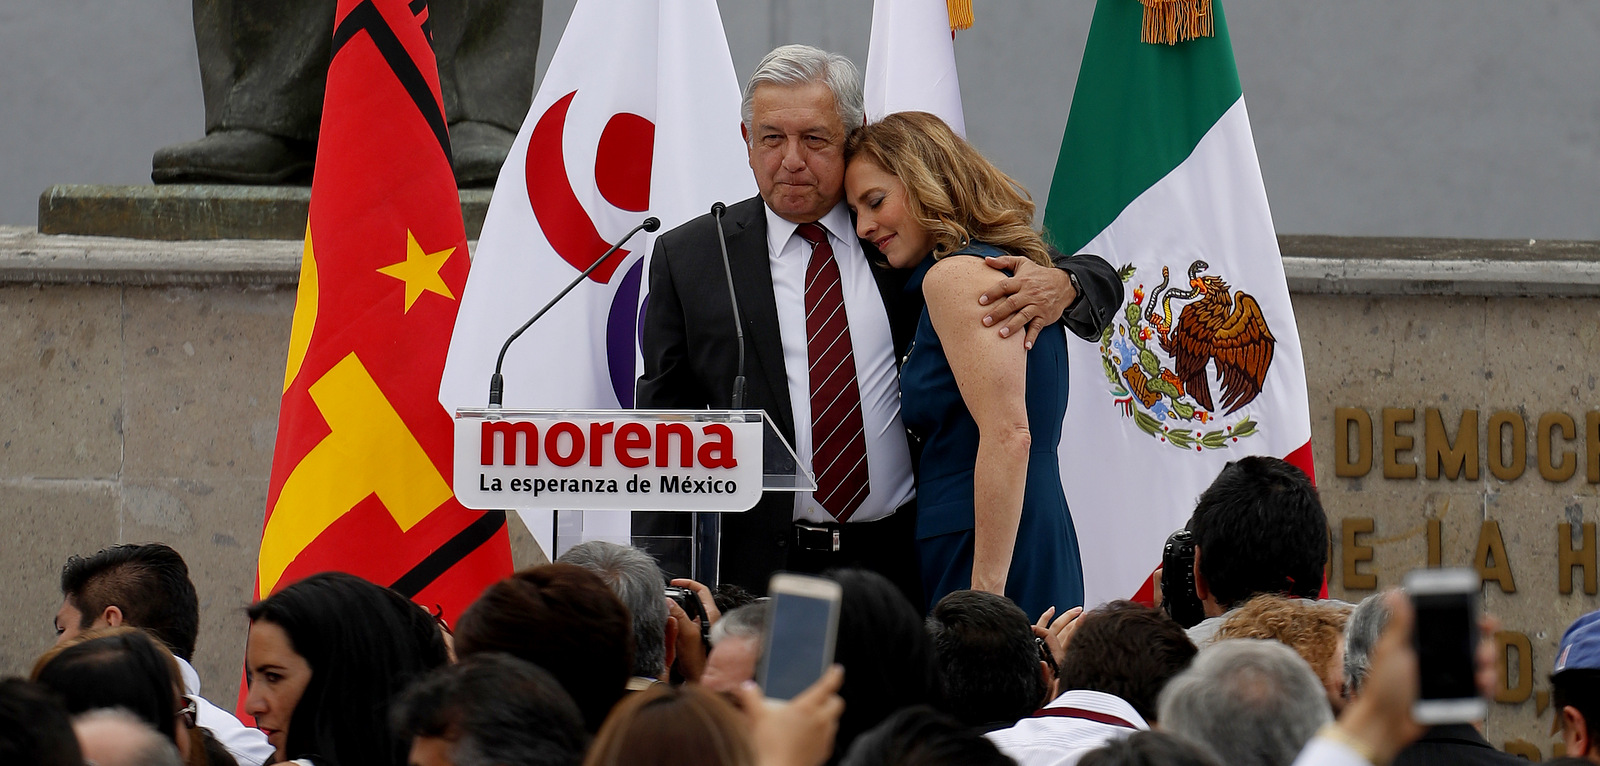 Presidential candidate Andres Manuel Lopez Obrador embraces his wife Beatriz Gutierrez after formalizing his candidacy at the National Electoral Institute in Mexico City, March 16, 2018. Mexico will hold elections on July 1. (AP/Eduardo Verdugo)